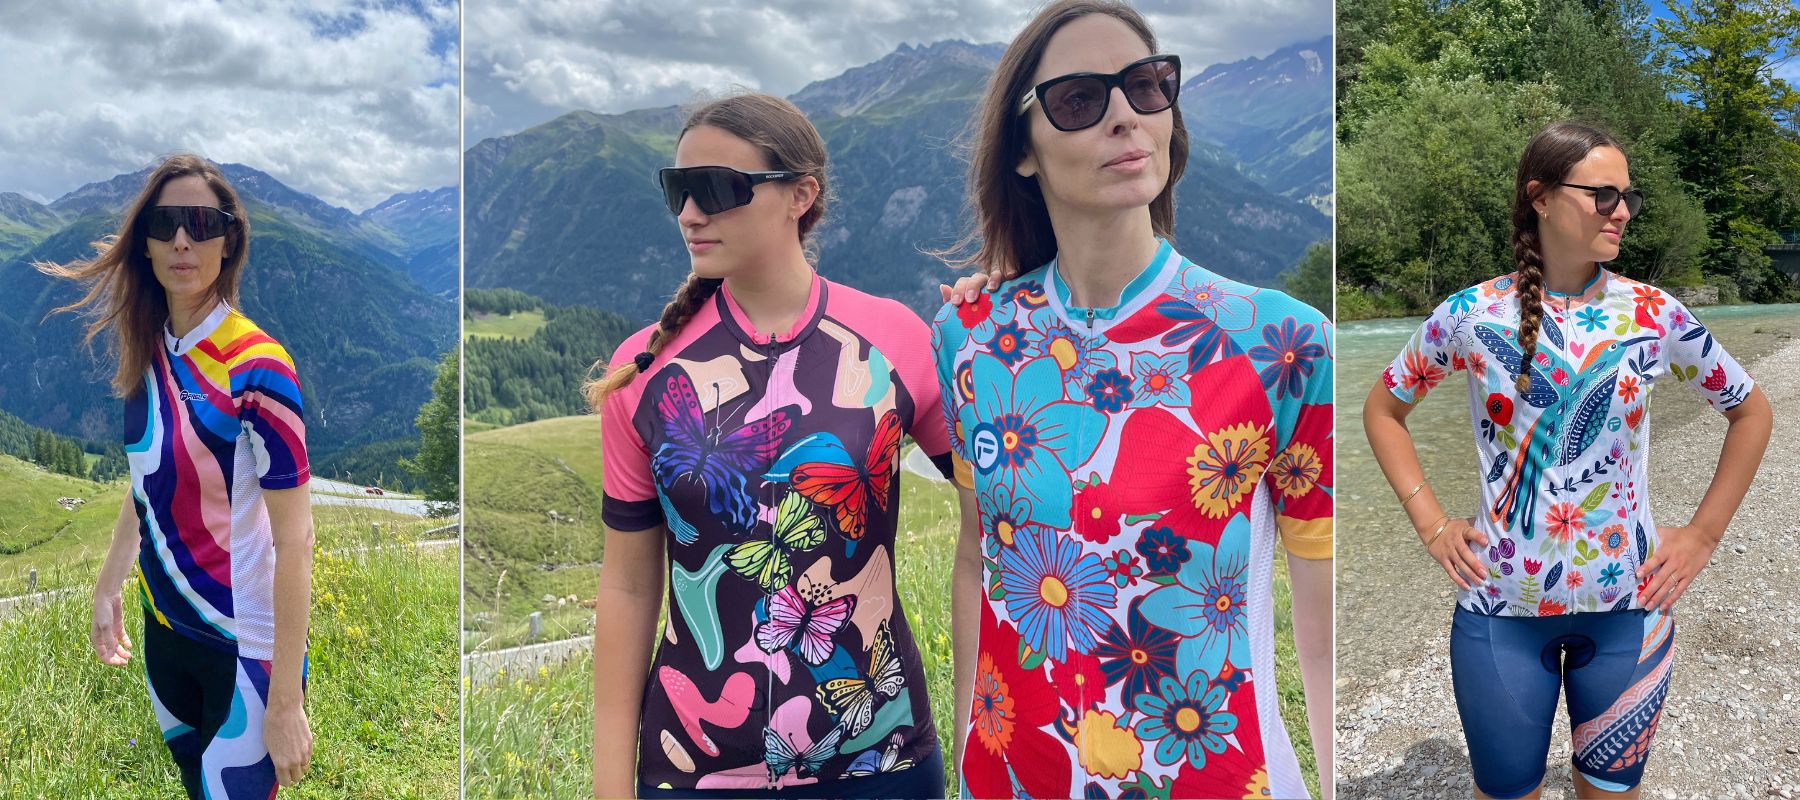 This photo captures the essence of Cycling Frelsi's brand: bold, stylish, and adventurous. Two women conquer the mountains with confidence and flair, their Cycling Frelsi jerseys a testament to their commitment to both fashion and performance.